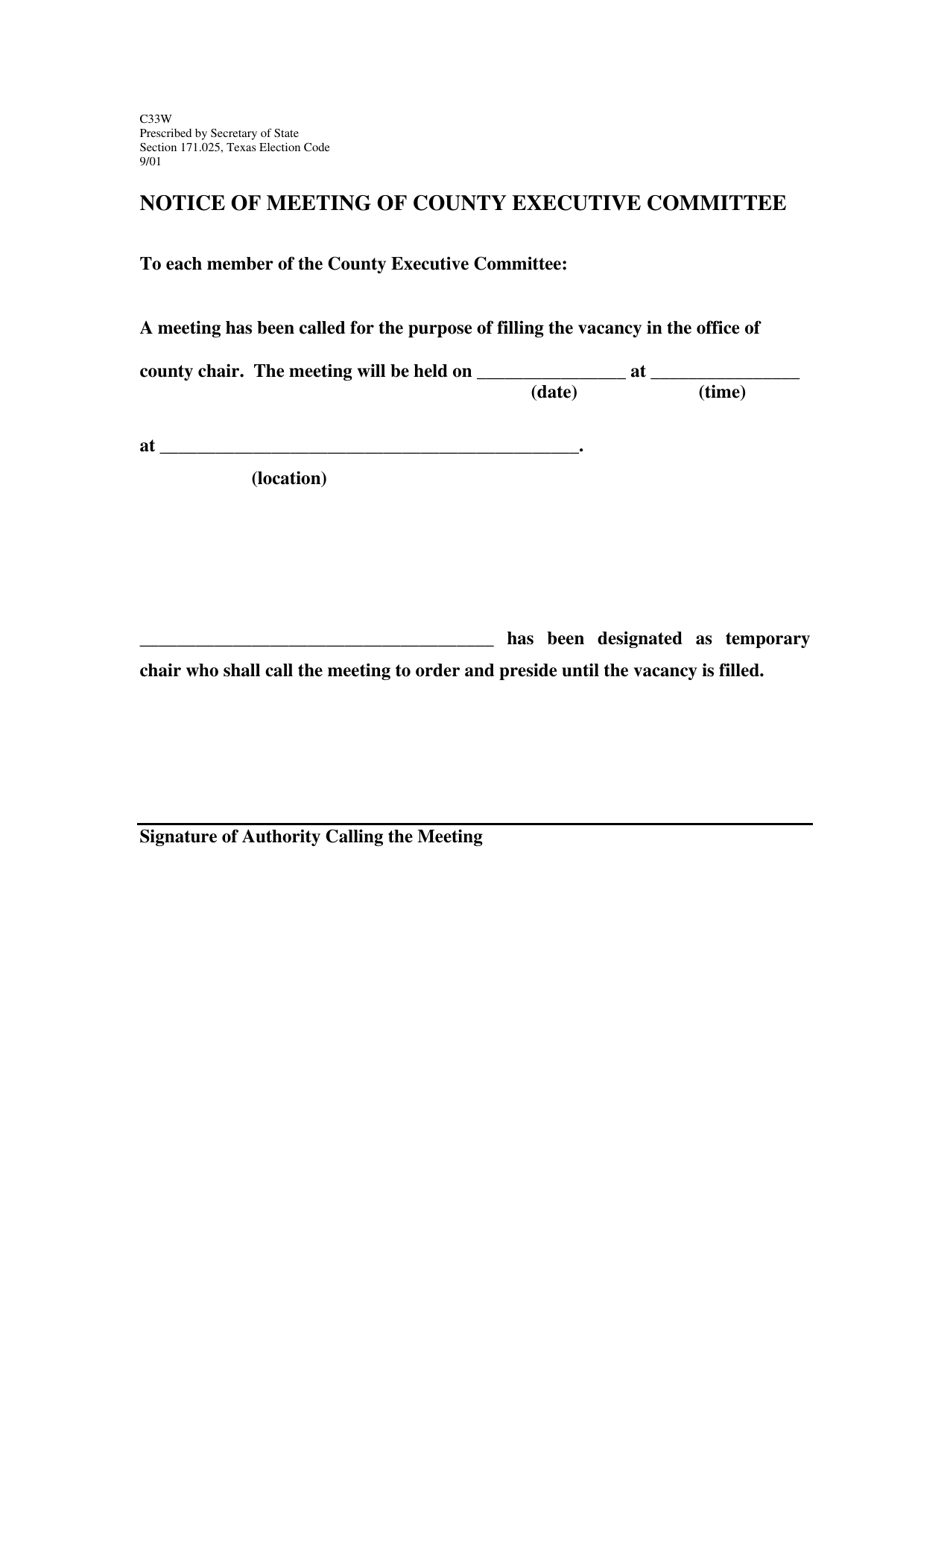 Form C33W Notice of Meeting of County Executive Committee - Texas, Page 1